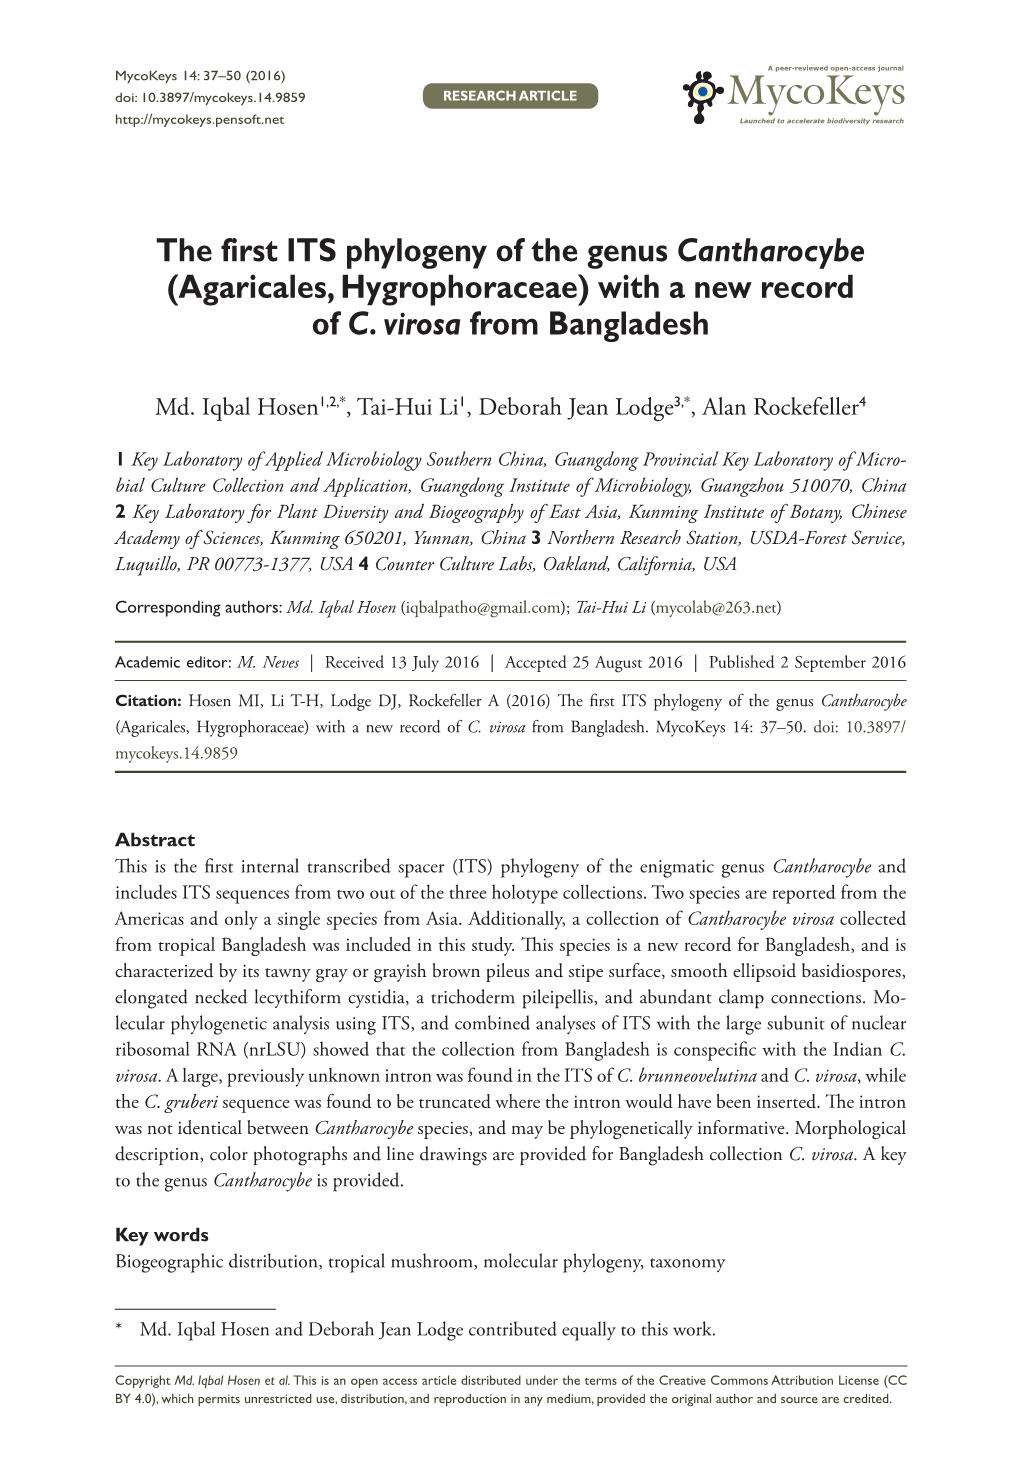 The First ITS Phylogeny of the Genus Cantharocybe (Agaricales, Hygrophoraceae) with a New Record of C